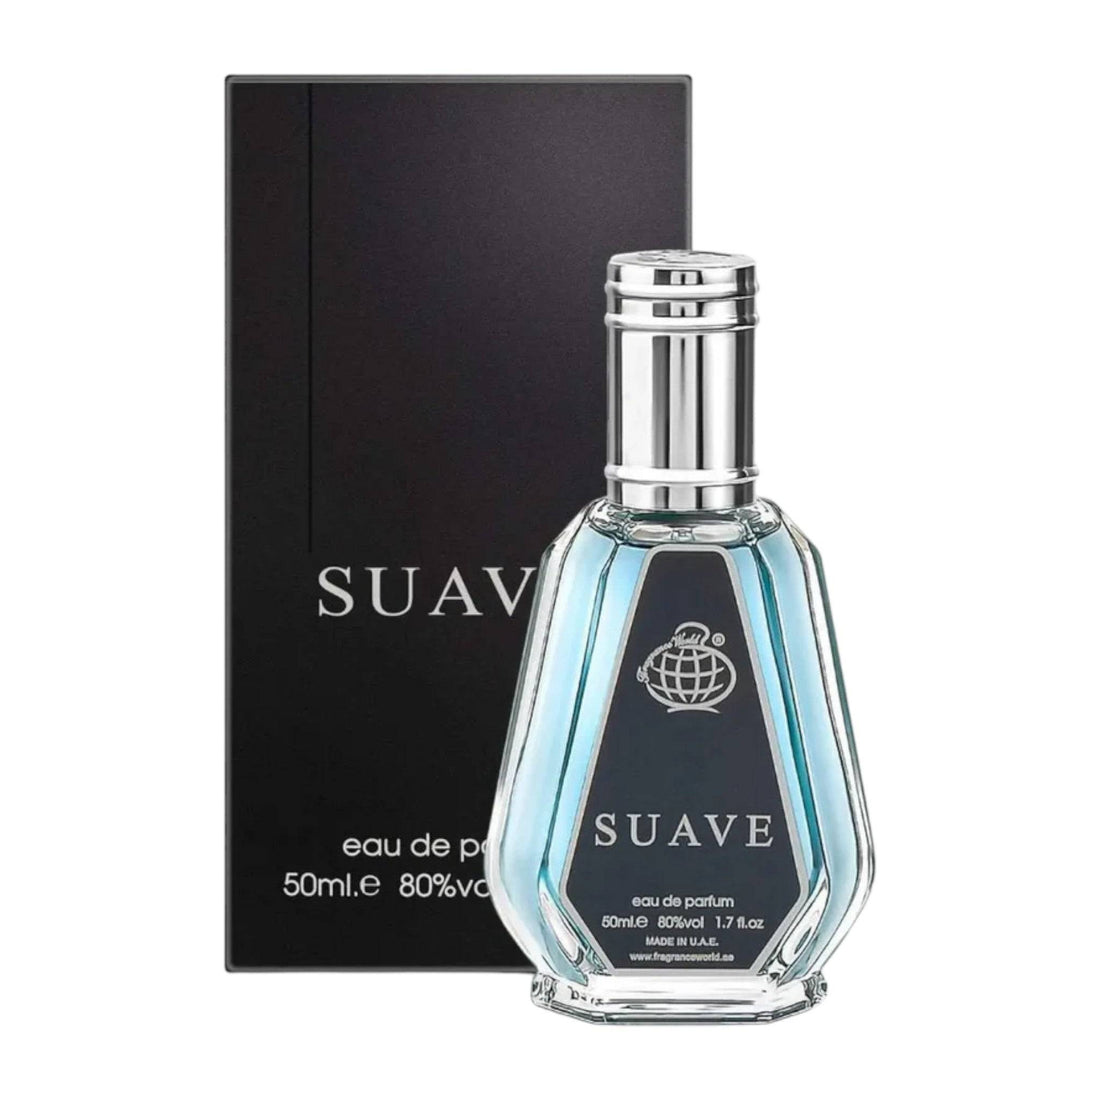 Elegant bottle of Suave Eau De Parfum by Fragrance World, showcasing its sleek design and the vibrant notes of pepper, bergamot, and a rich woody base.